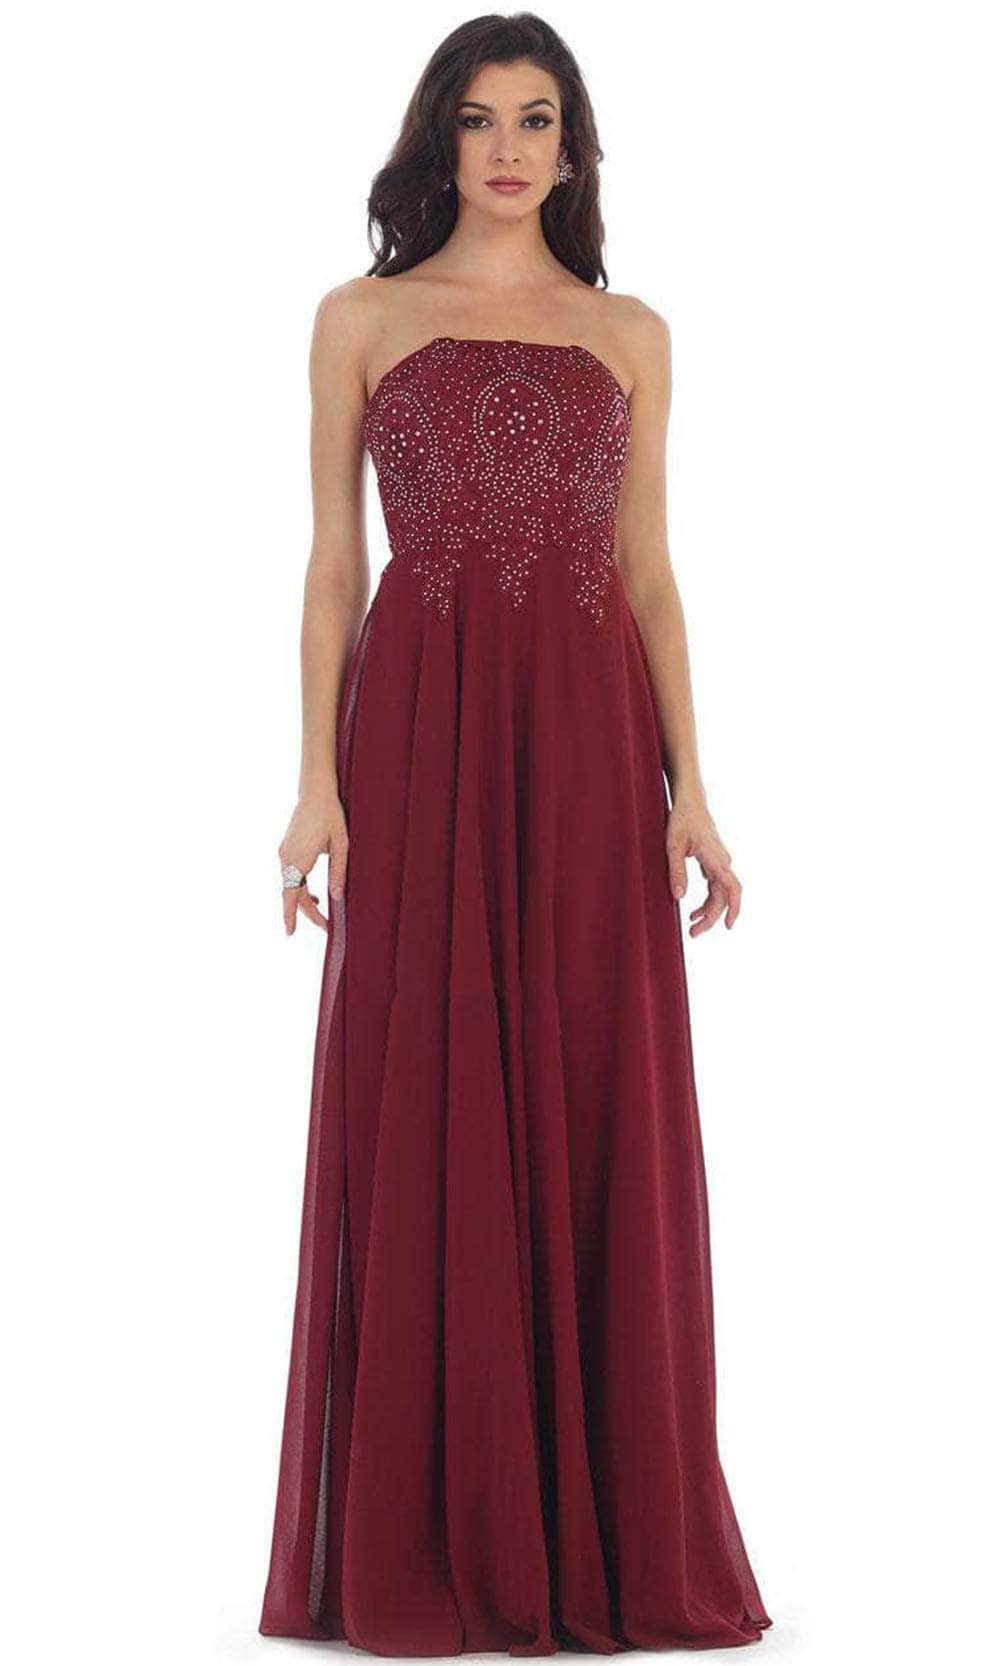 May Queen - MQ1277B Delicate Lace Strapless Corset Prom Gown Special Occasion Dress 22 / Burgundy